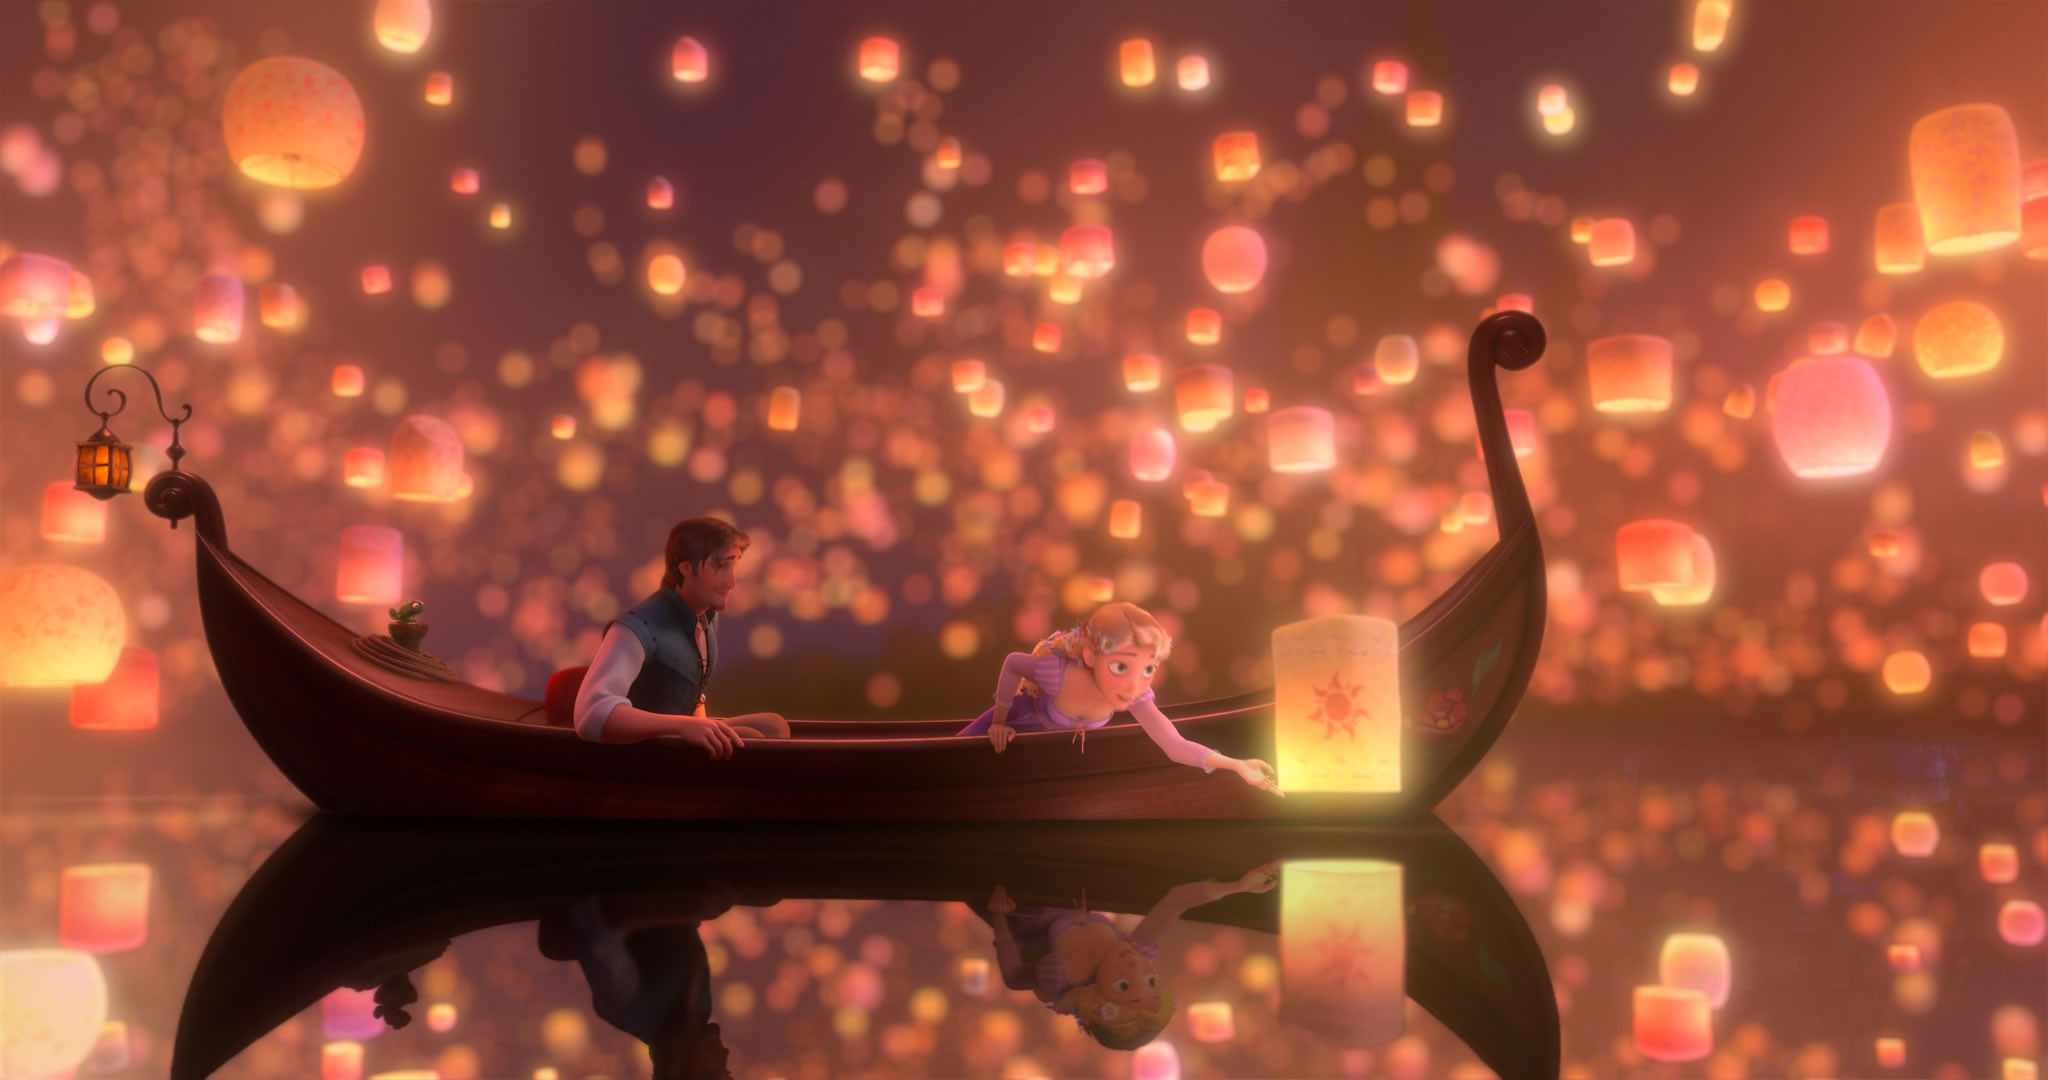 A boat with lanterns floating in the water - Rapunzel